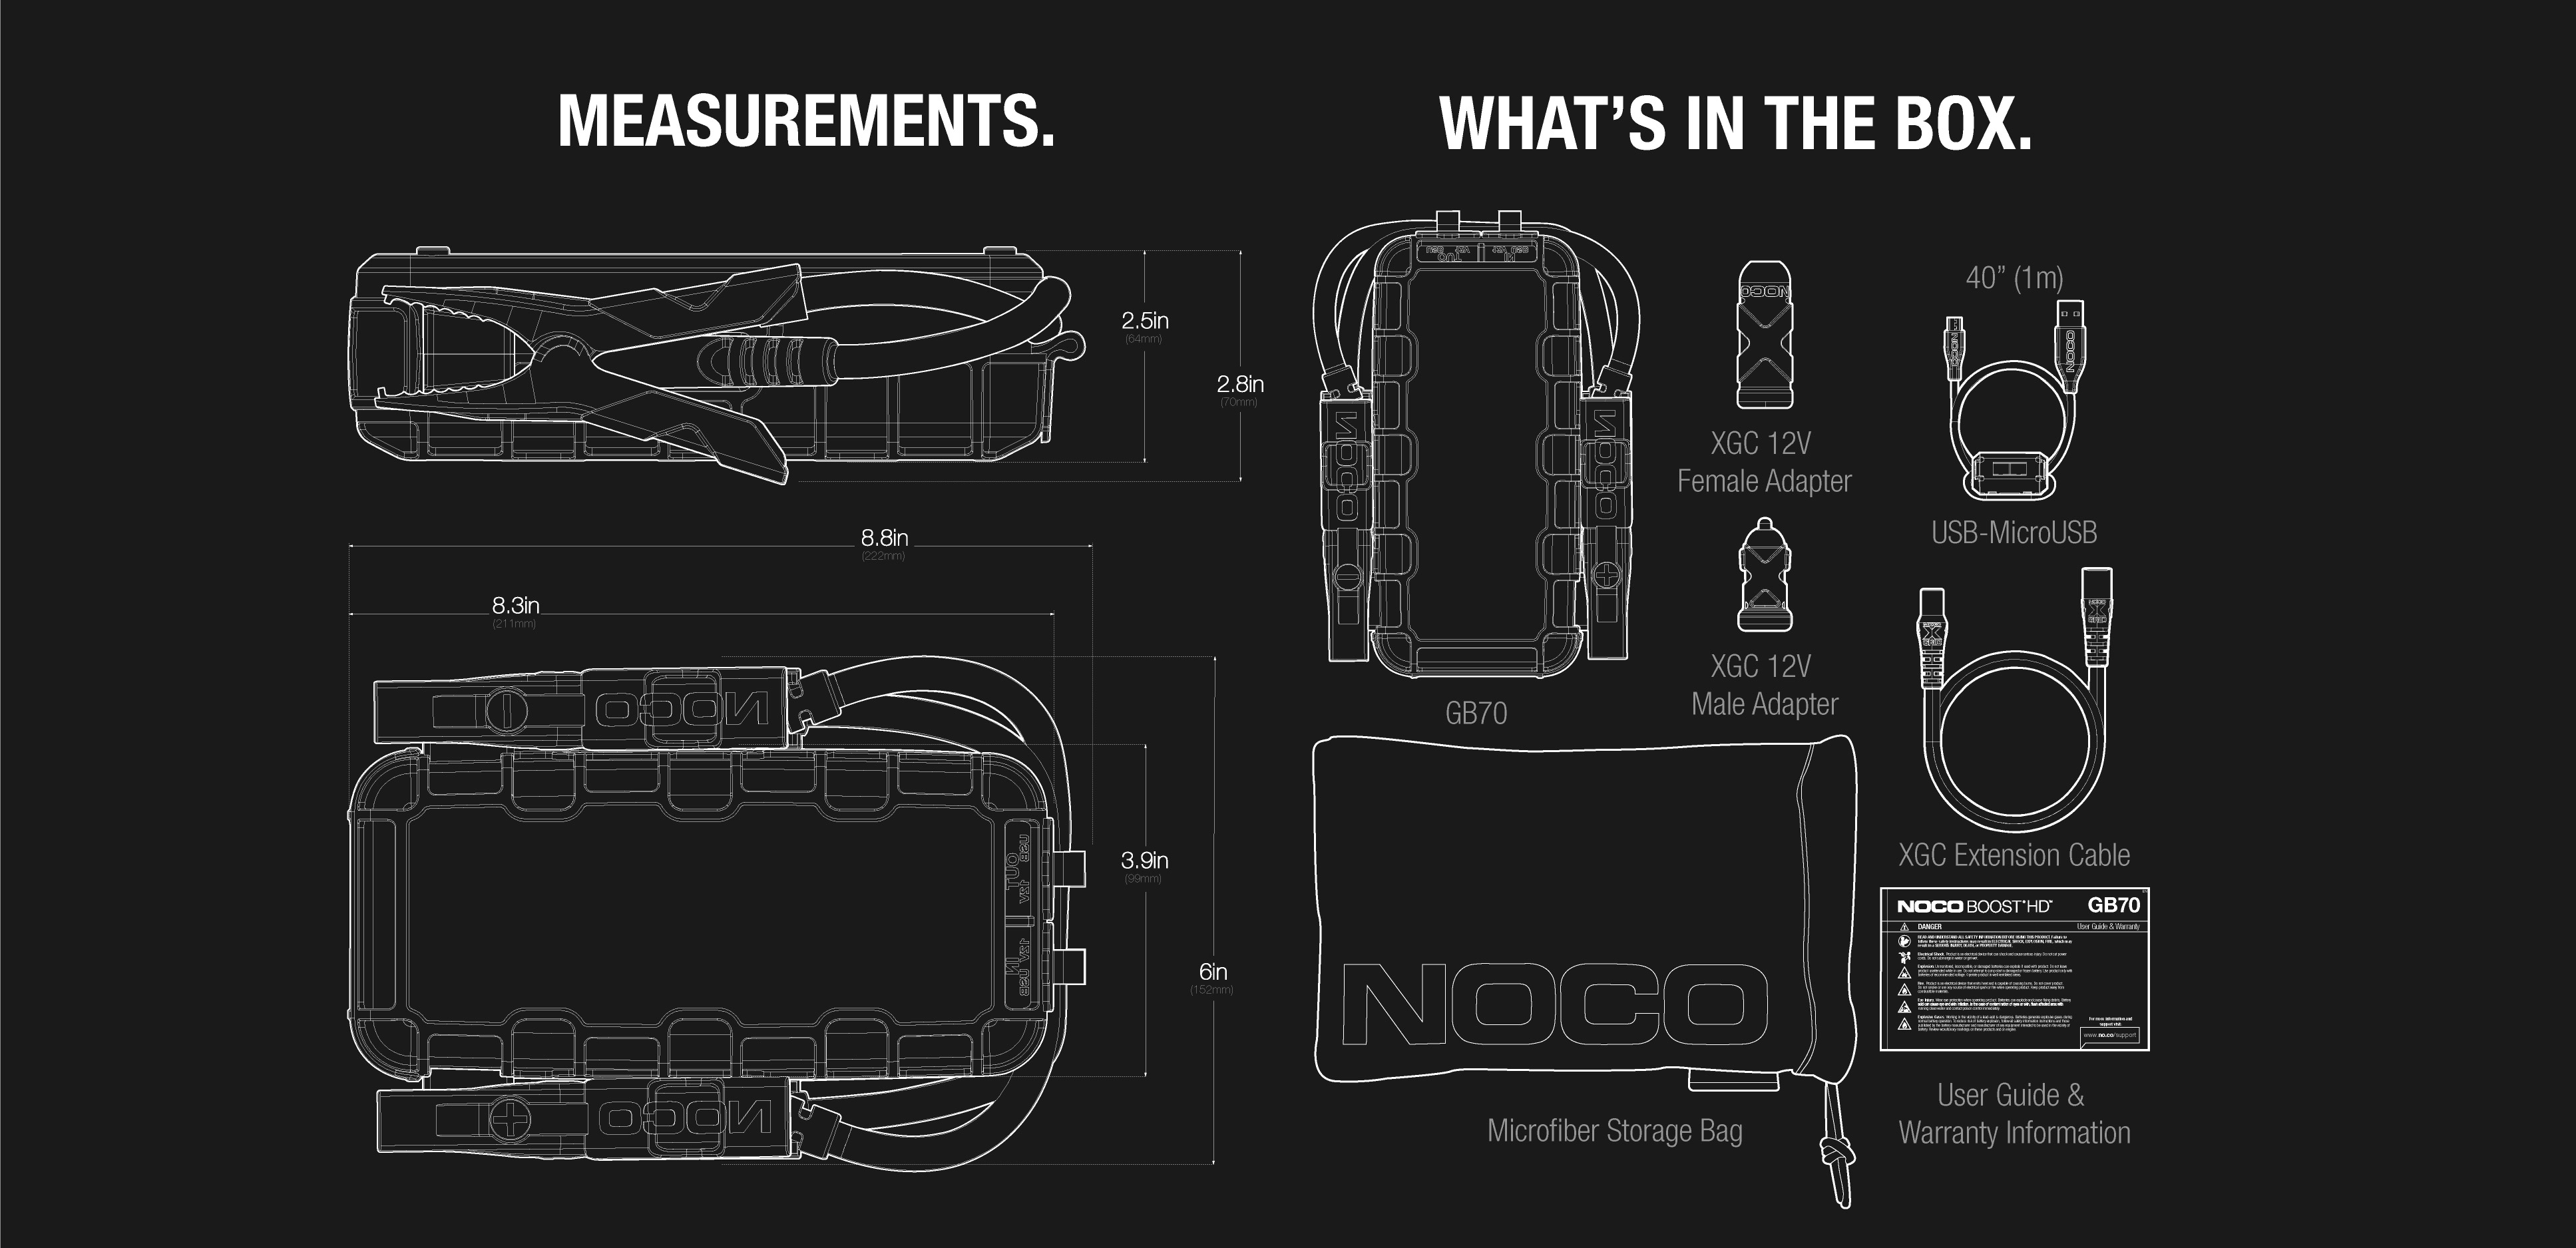 noco-gb70-boost-hd-measurement-whats-in-the-box-kit-and-accessories2x.jpg